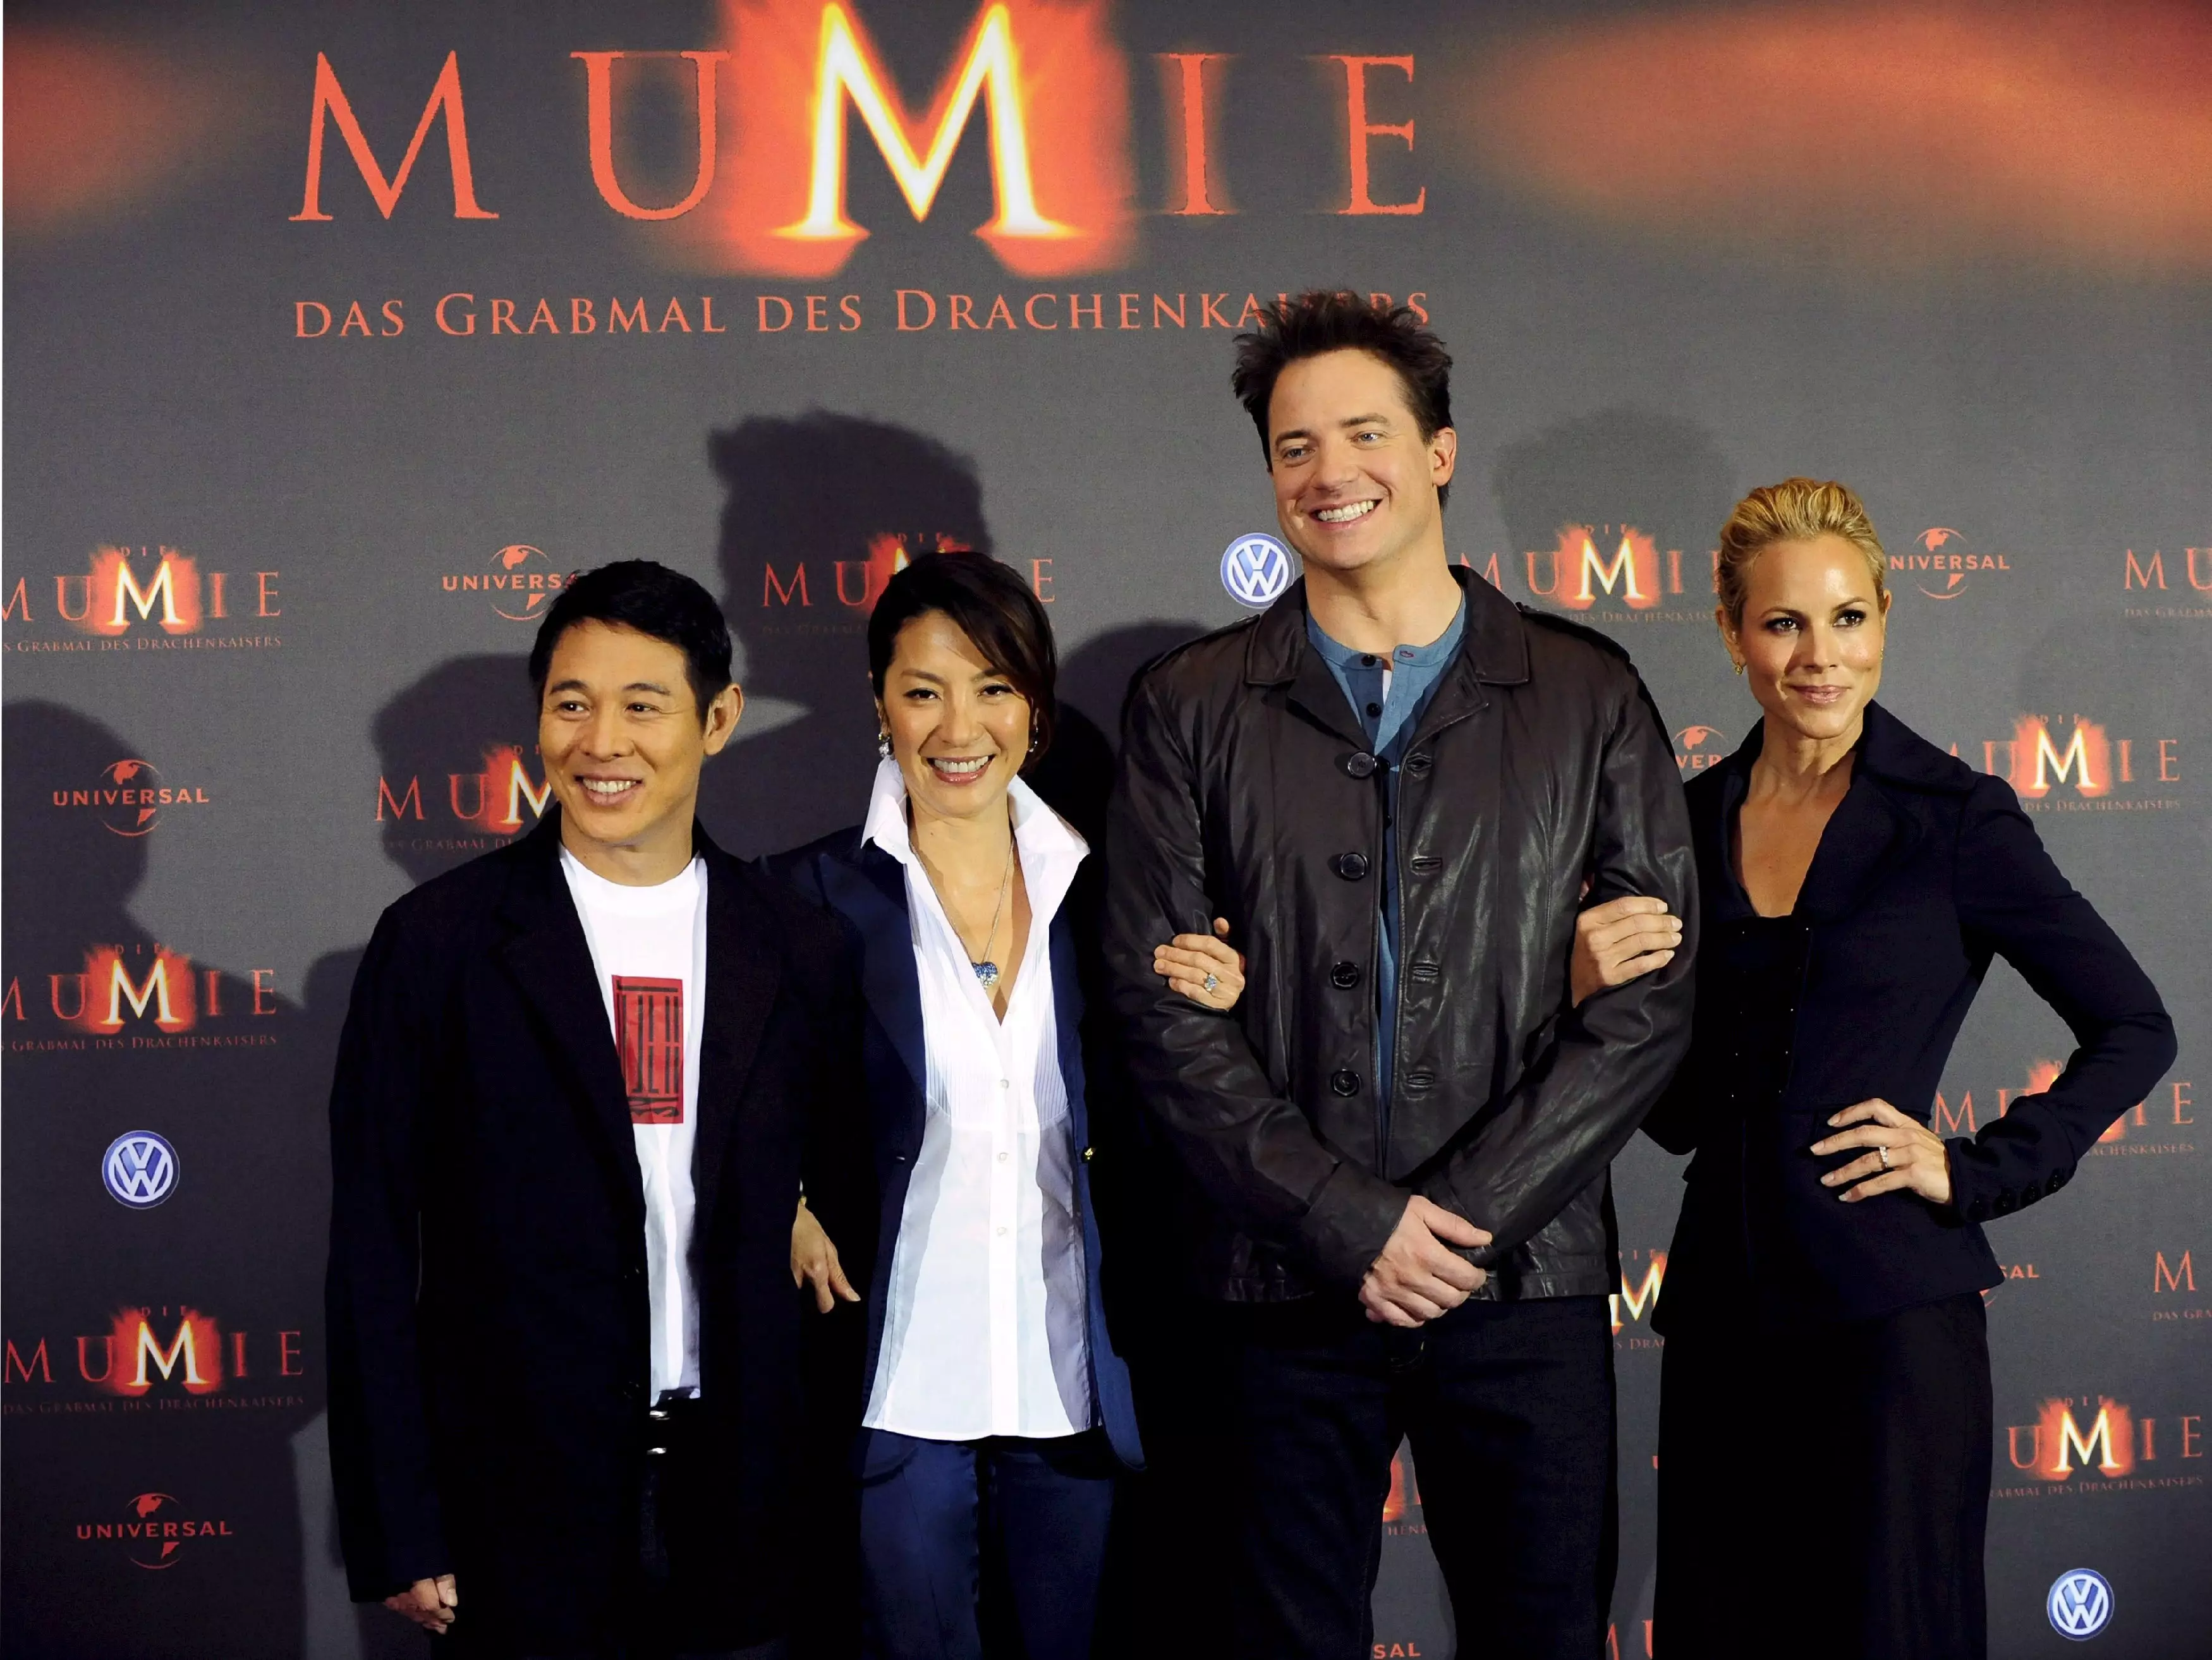 Actors from the film 'The Mummy: Tomb of the Dragon Emperor' at a photo call in 2008. (